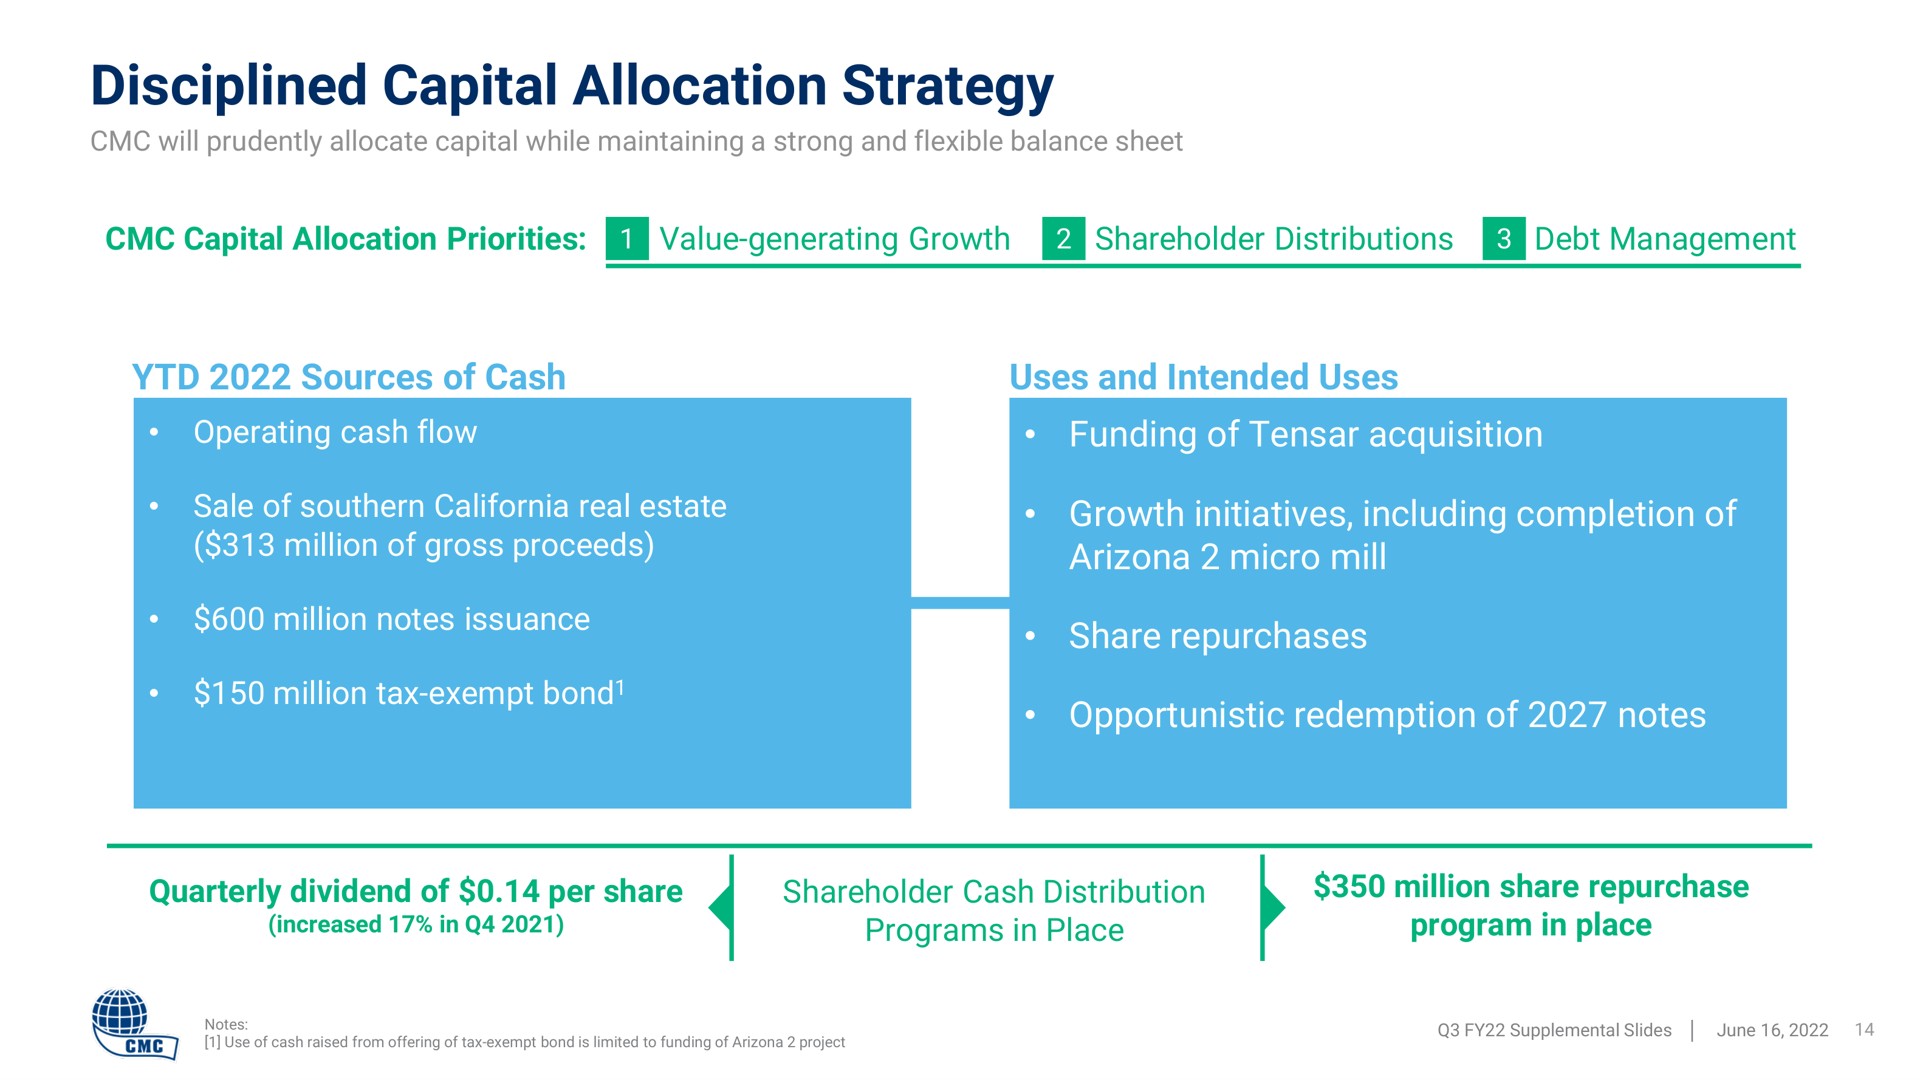 disciplined capital allocation strategy sources of cash uses and intended uses funding of acquisition growth initiatives including completion of micro mill share repurchases opportunistic redemption of notes priorities value generating shareholder distributions debt management operating flow alae a million gross proceeds cans quarterly dividend per shareholder distribution million repurchase | Commercial Metals Company